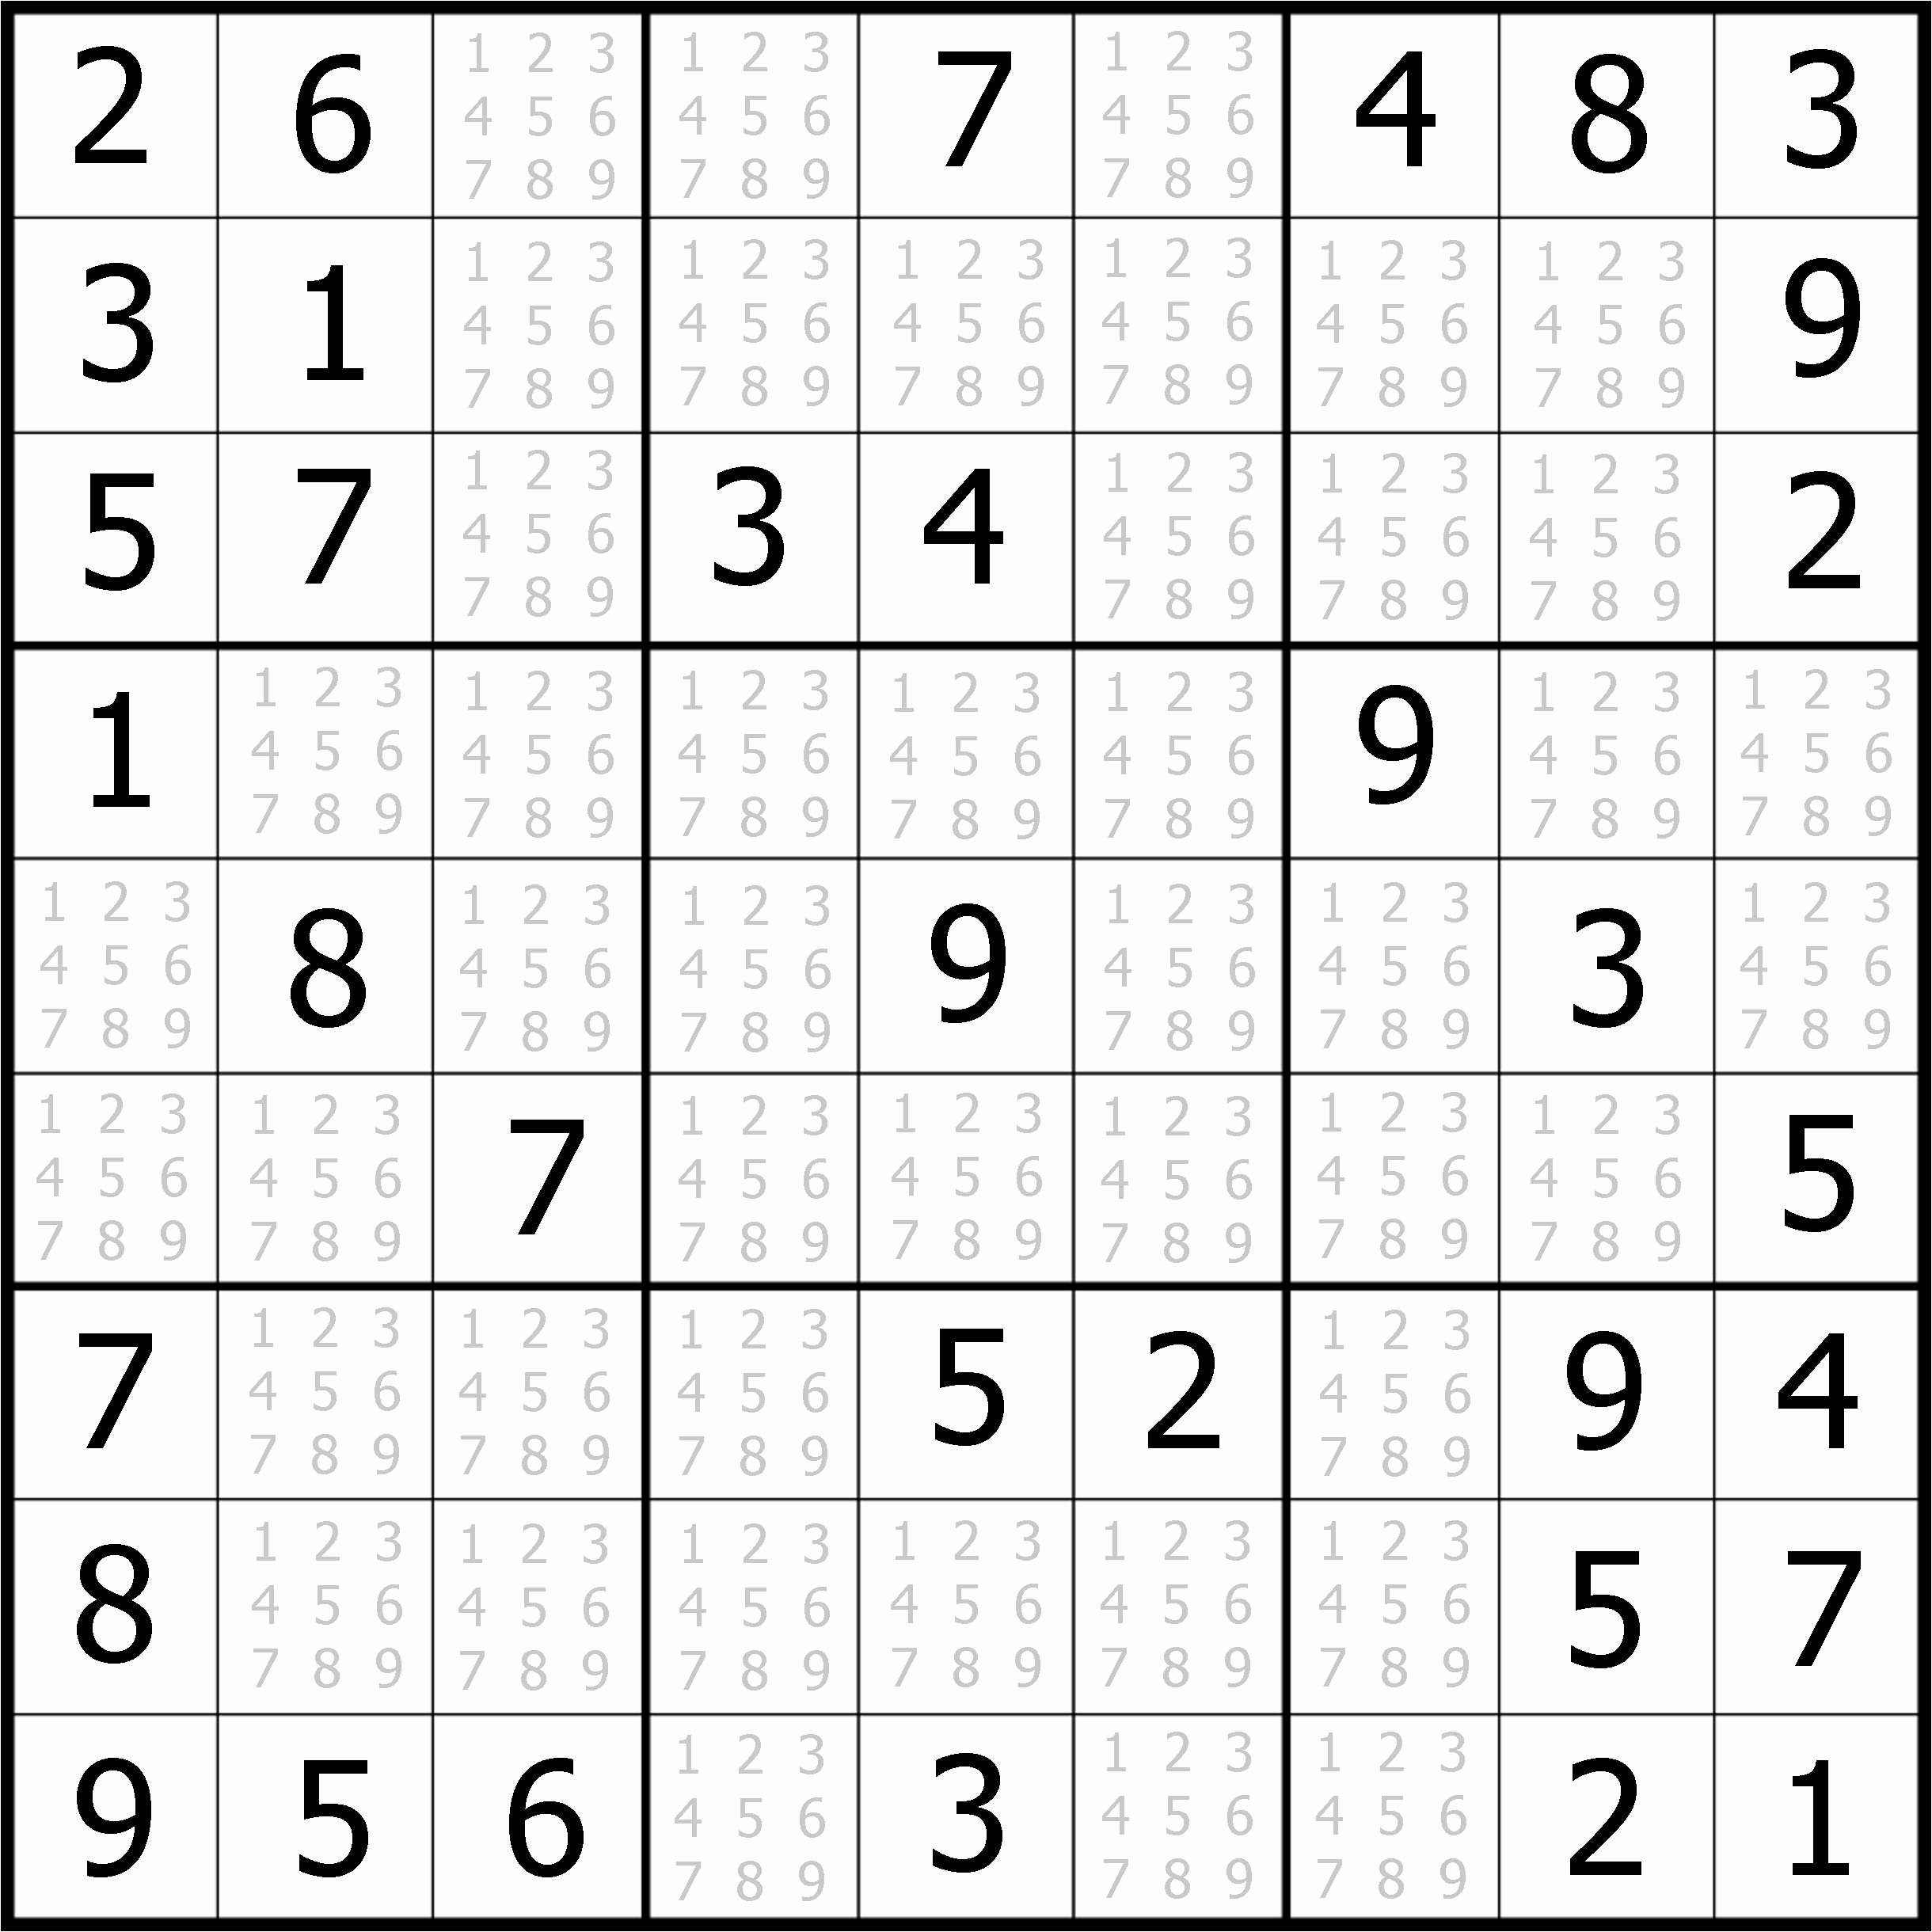 Printable Sudoku Puzzles For Adults Printable Crossword Puzzles